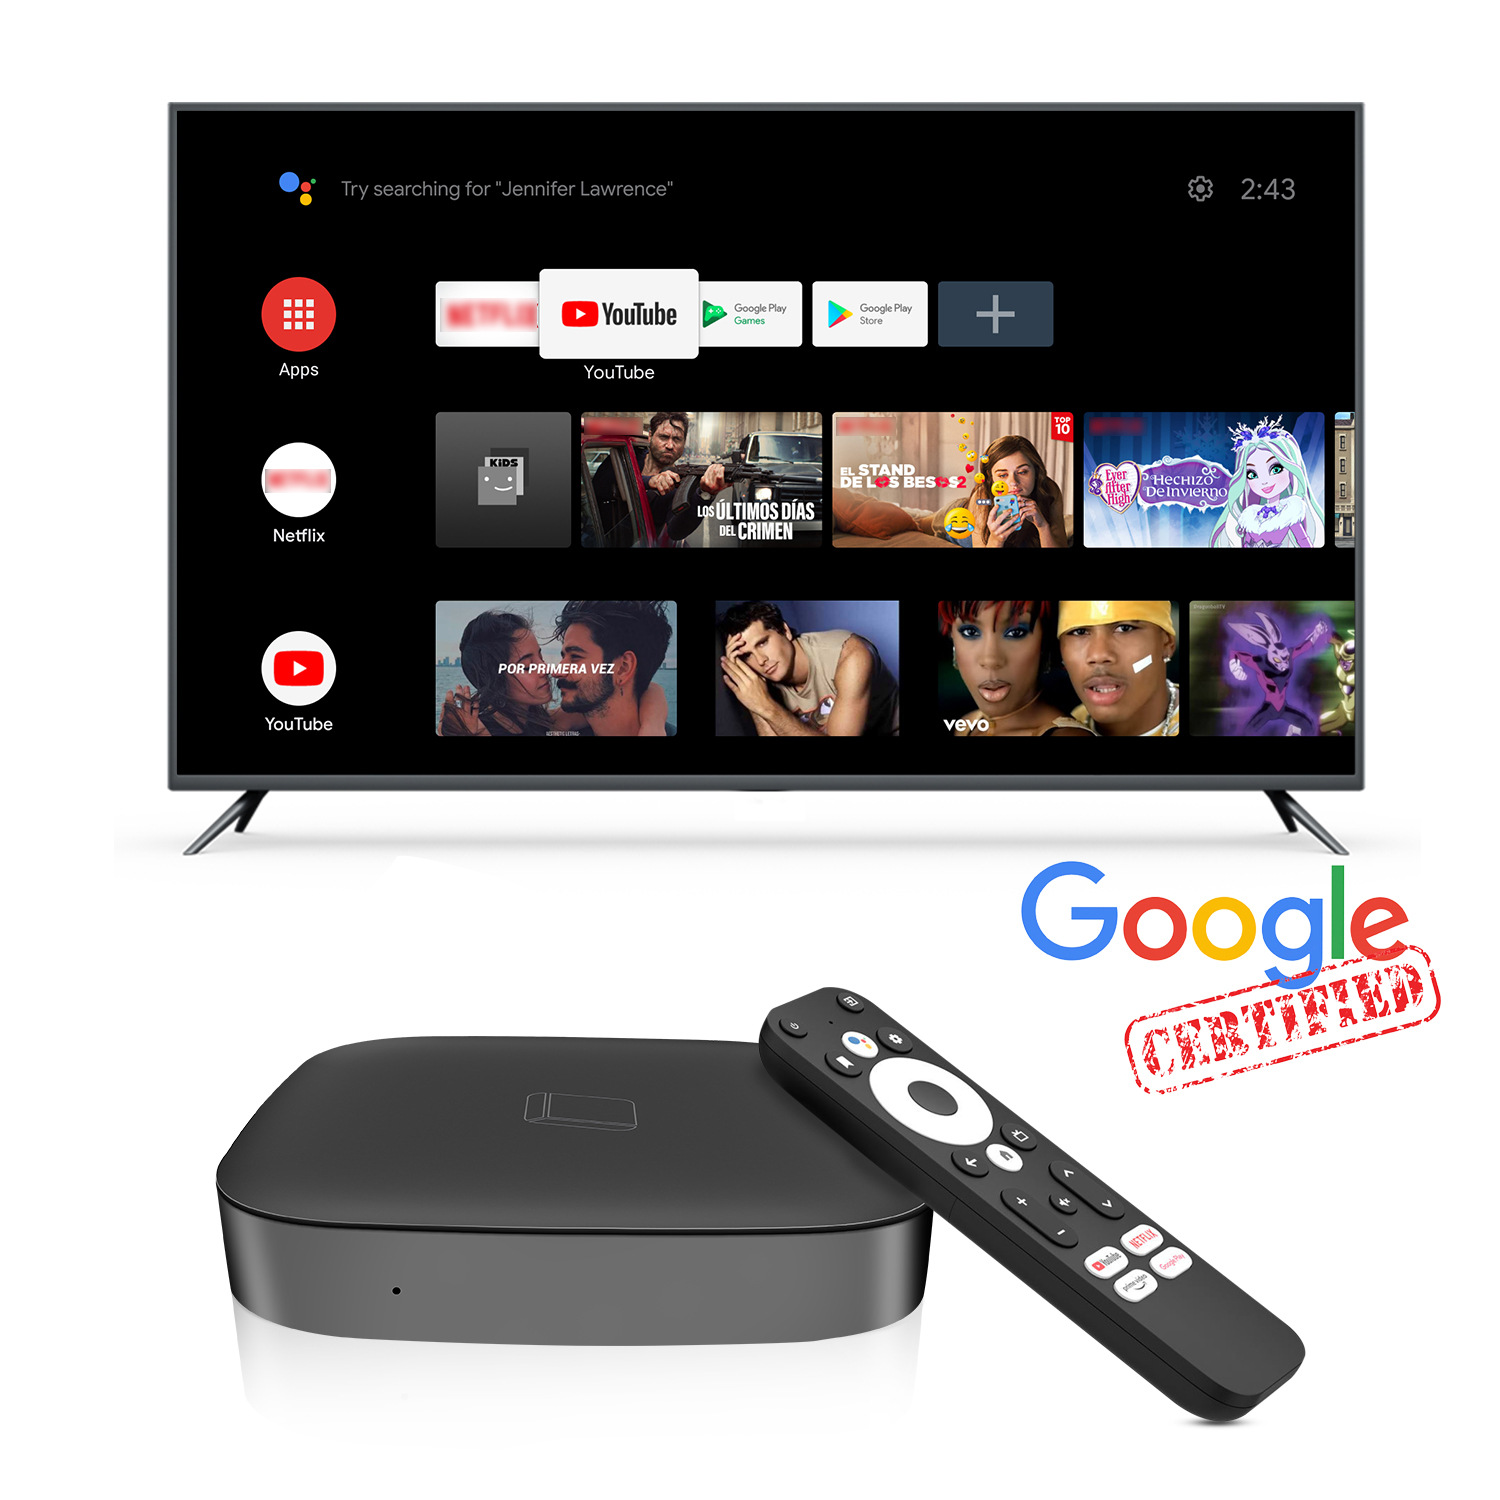 HAKO-DV9161-Google-TV-Box--Android-110-OS-4K-HDR-Netflix-YouTube-Certificate-Android-TV-Set-Top-Box-1974219-2